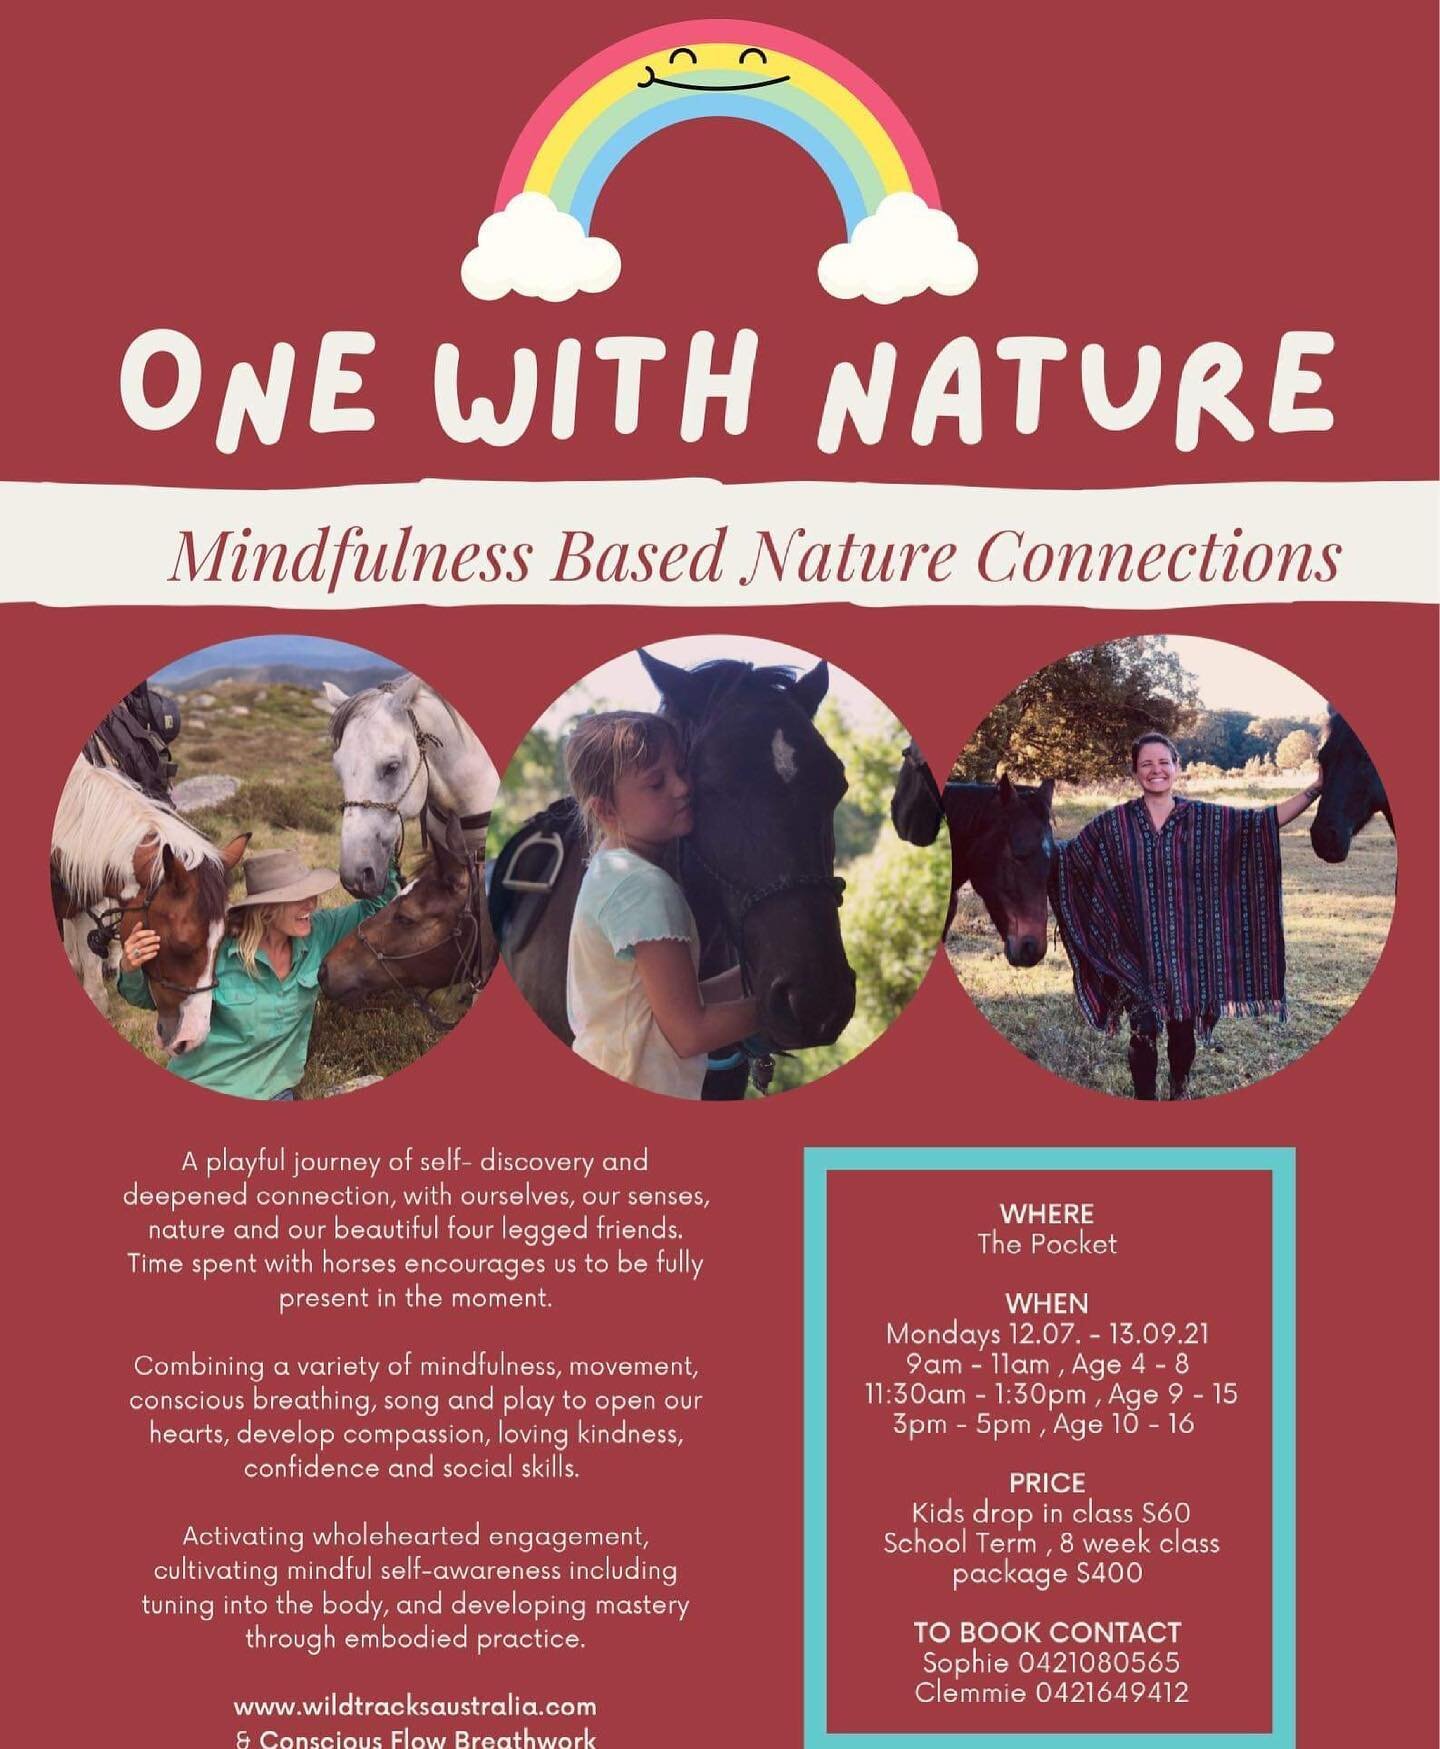 🐴 Hello beautiful parents and caregivers! 

🪴 Our One With Nature workshops are launching this term&mdash; on Mondays. Book now to reserve a spot, they&rsquo;ll go VERY quickly! Our trial workshops were a massive success. Thank you always for your 